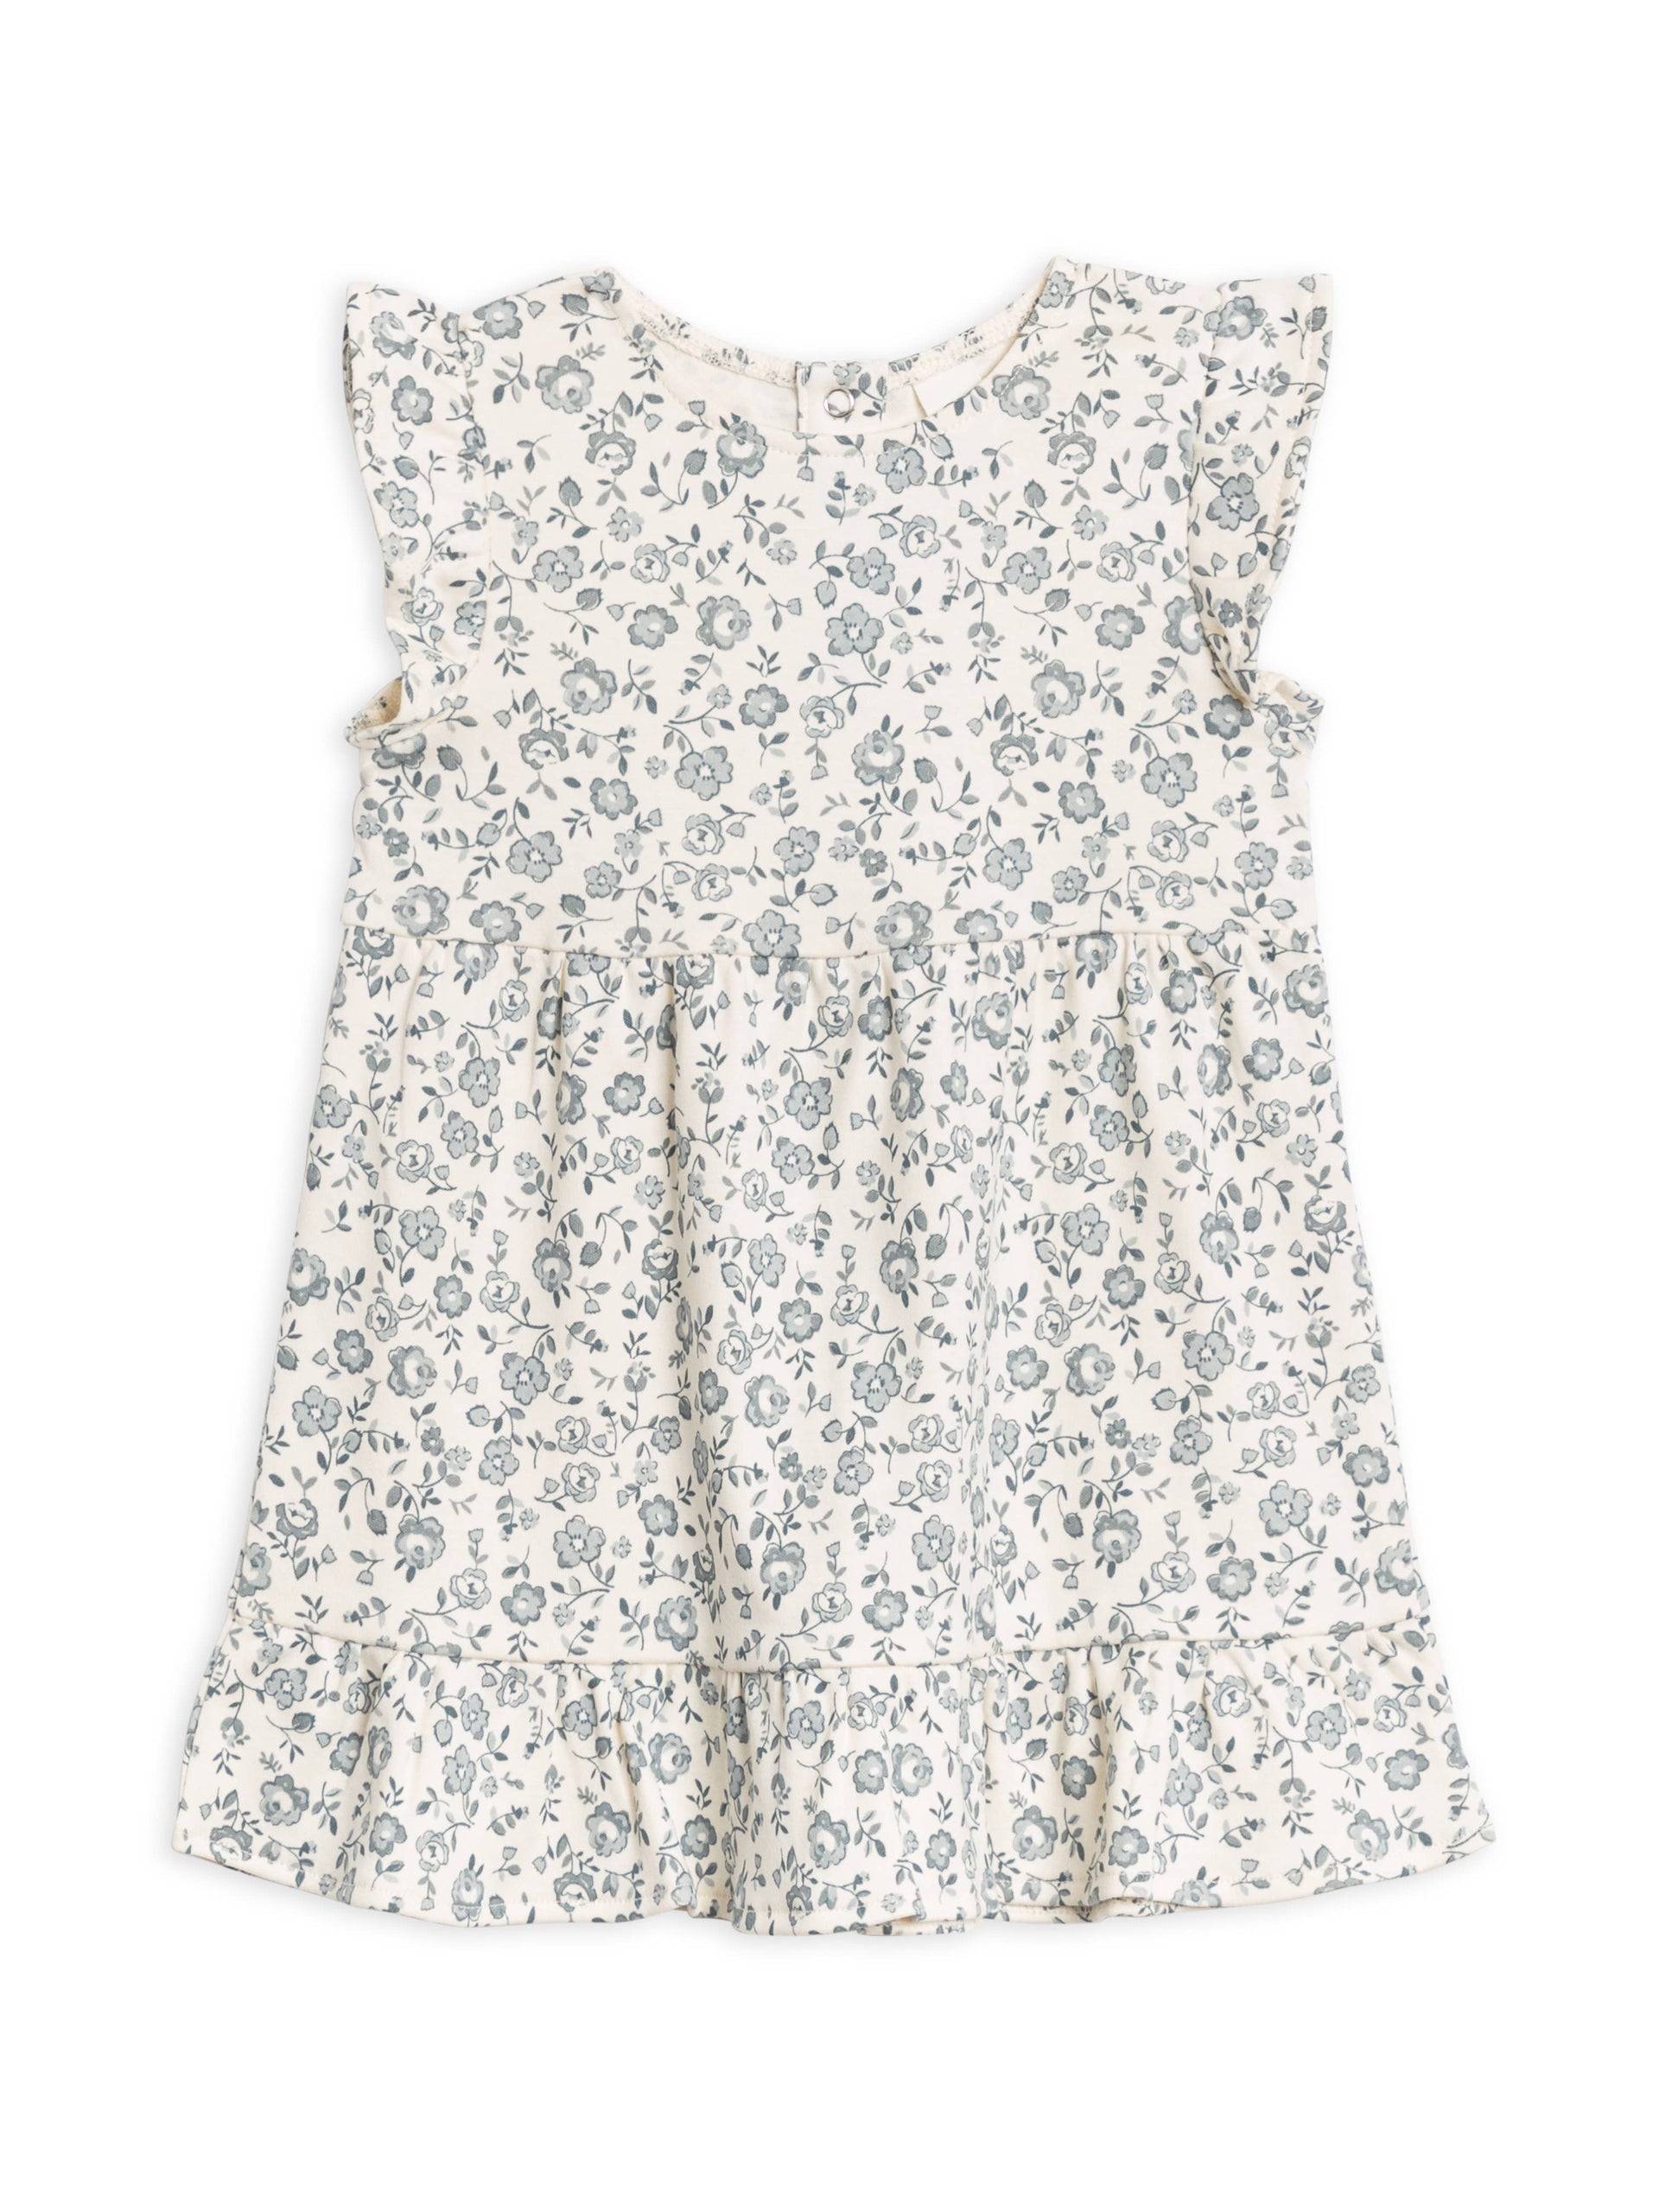 Colored Organics - Organic Baby & Kids Tilly Tiered Dress - Lena Floral: 2T